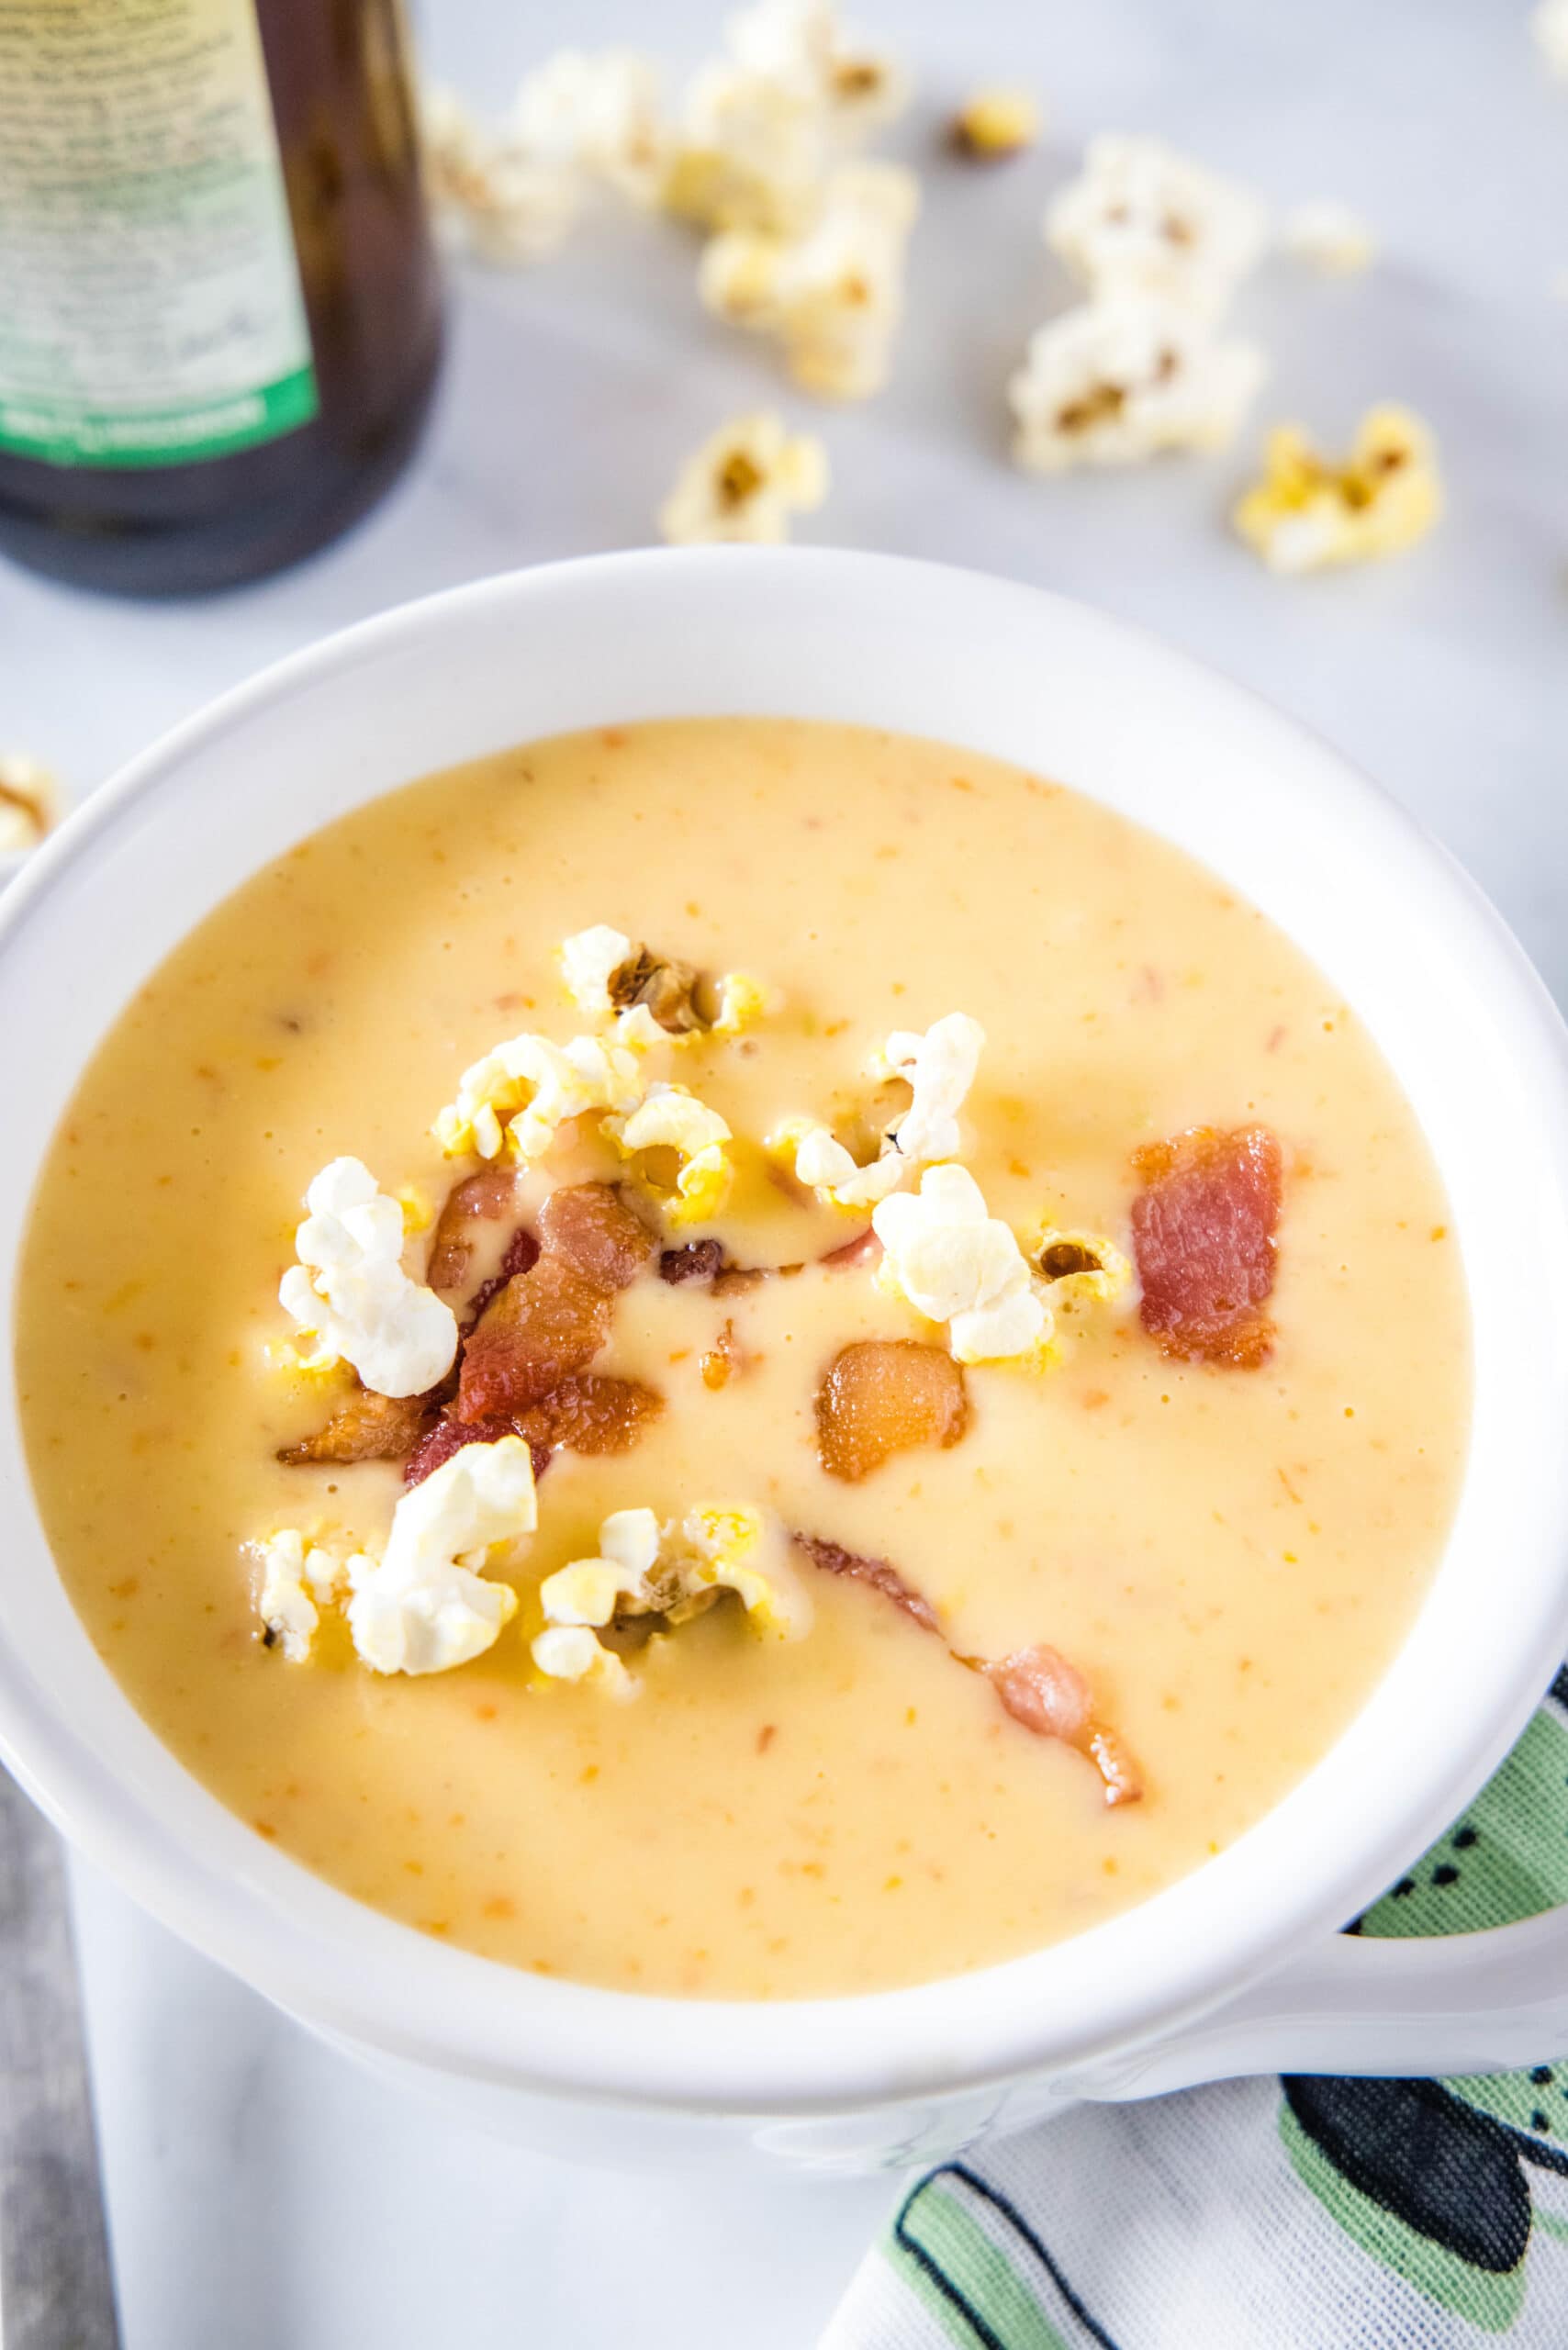 A bowl of cheese soup topped with popcorn and bacon, with a bottle of beer and some popcorn in the background